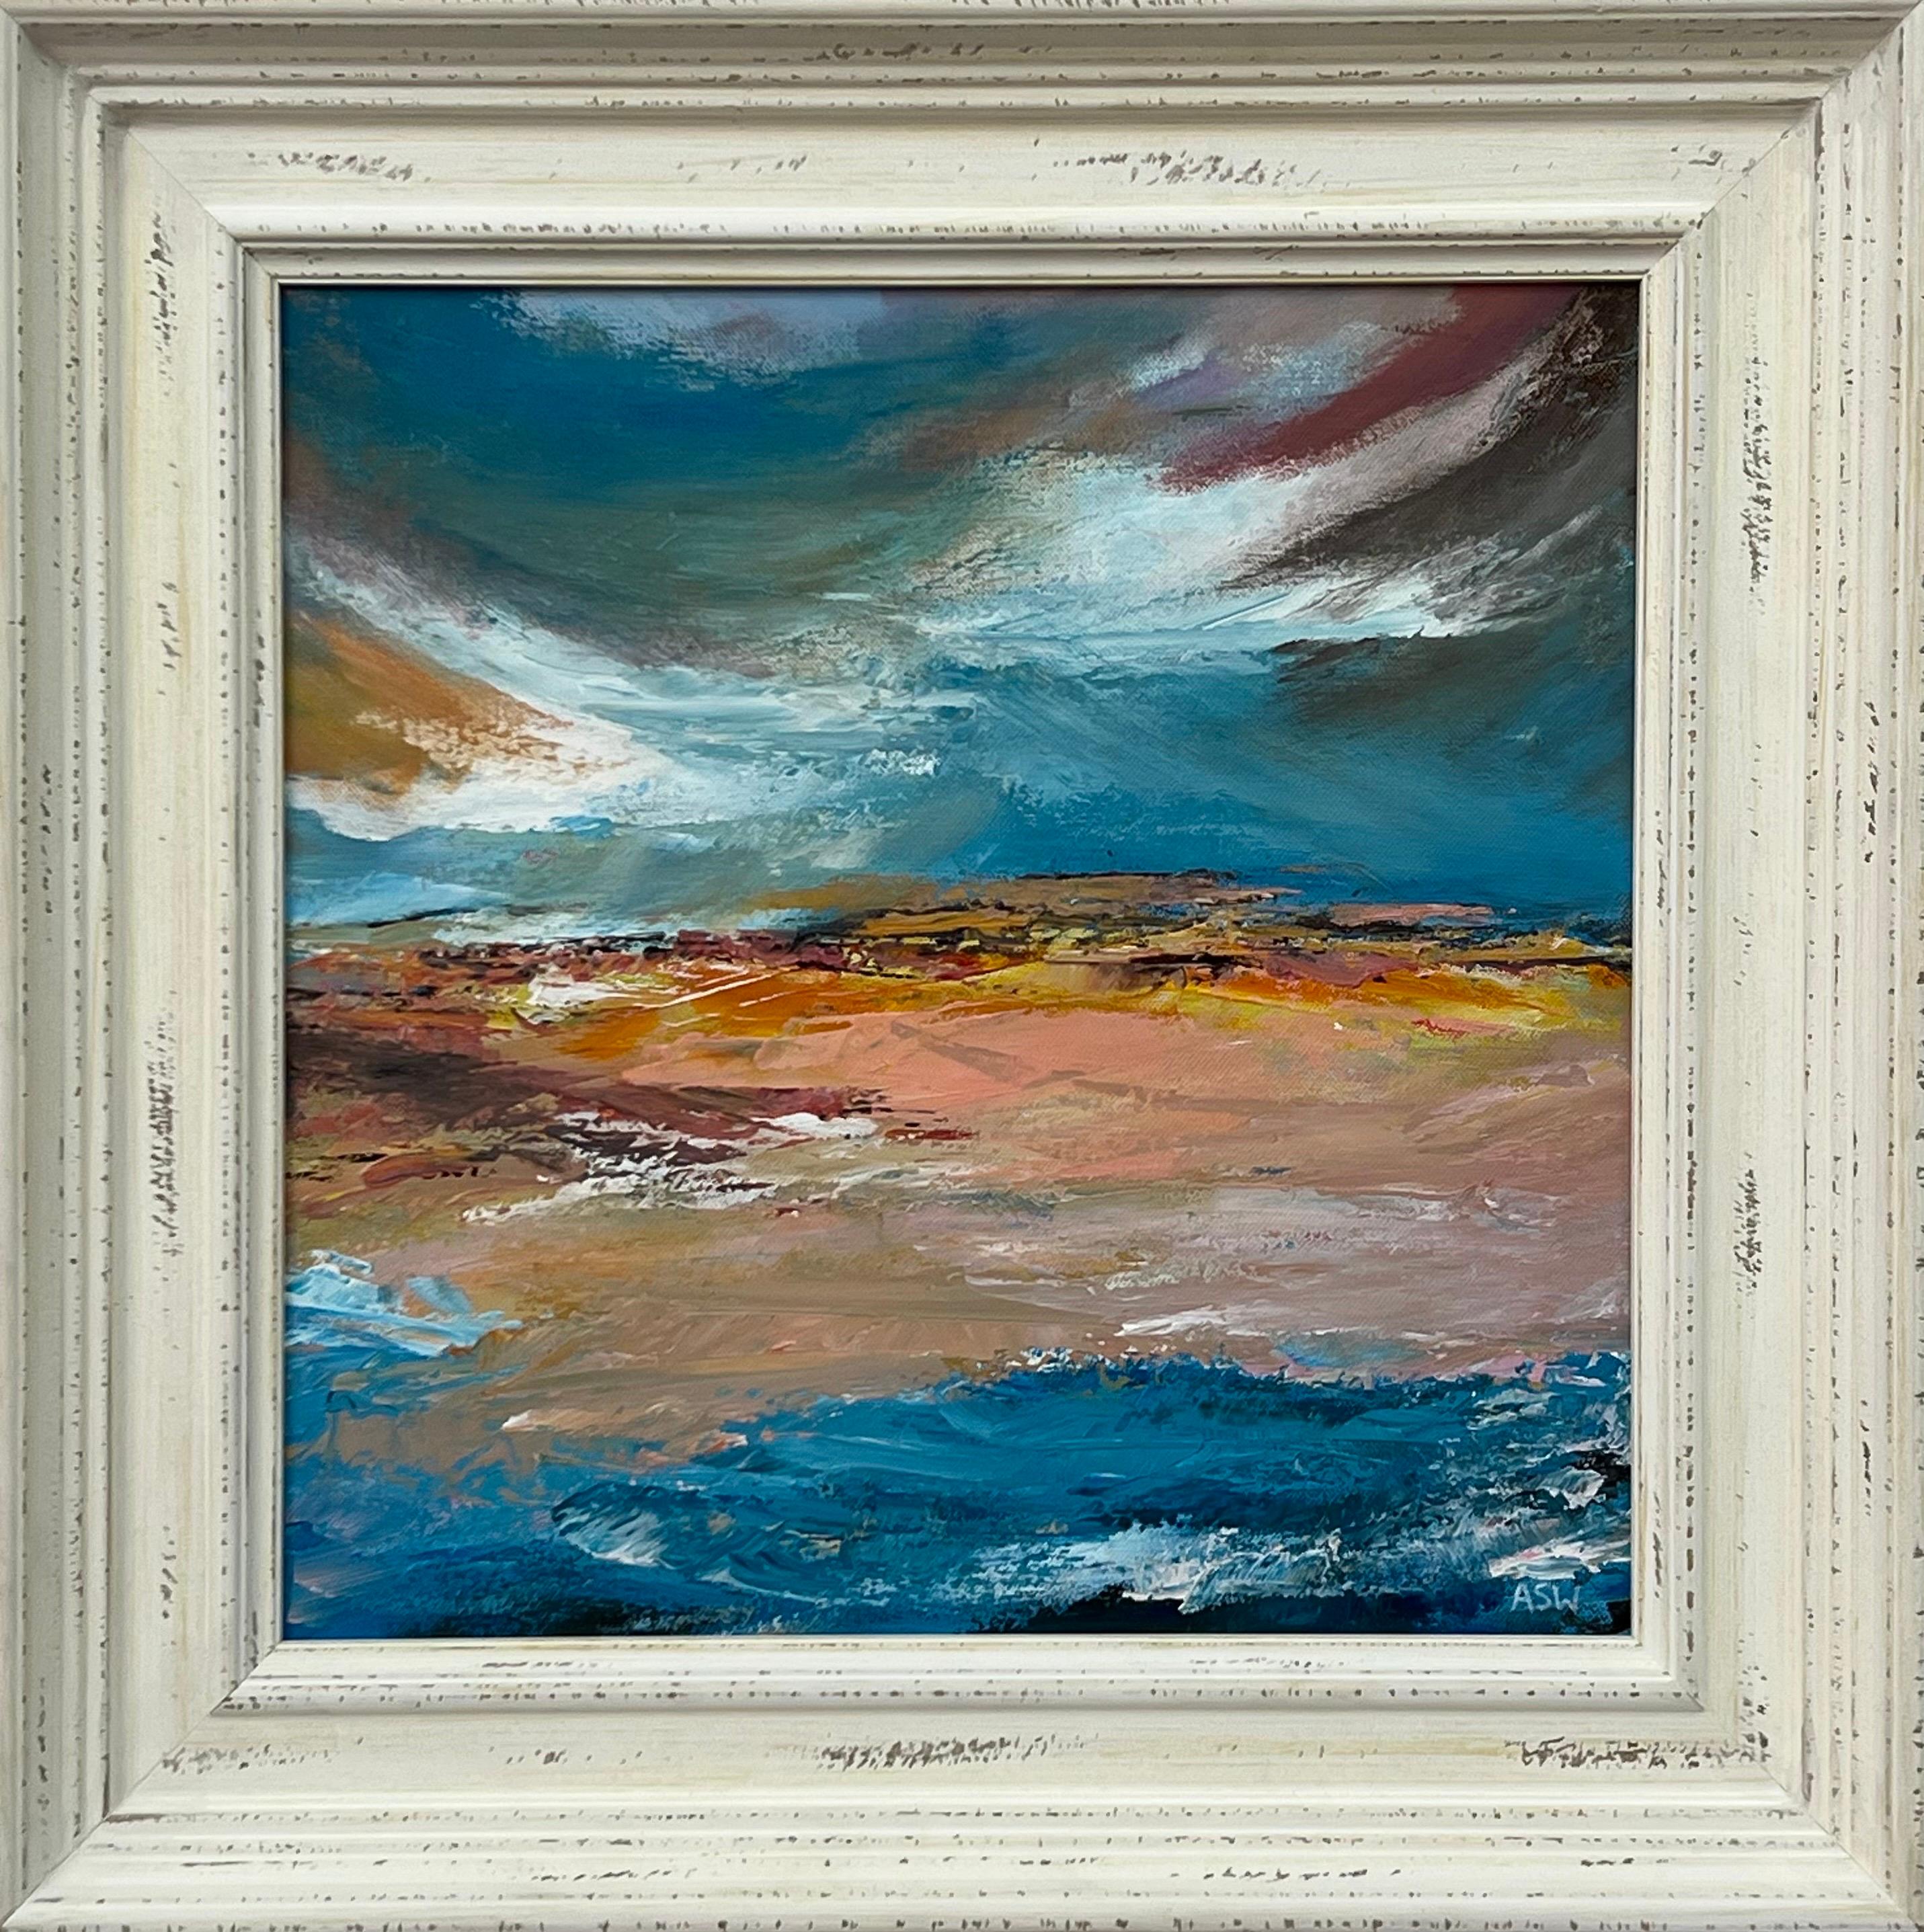 Expressive Abstract Seascape Landscape Painting by Contemporary British Artist